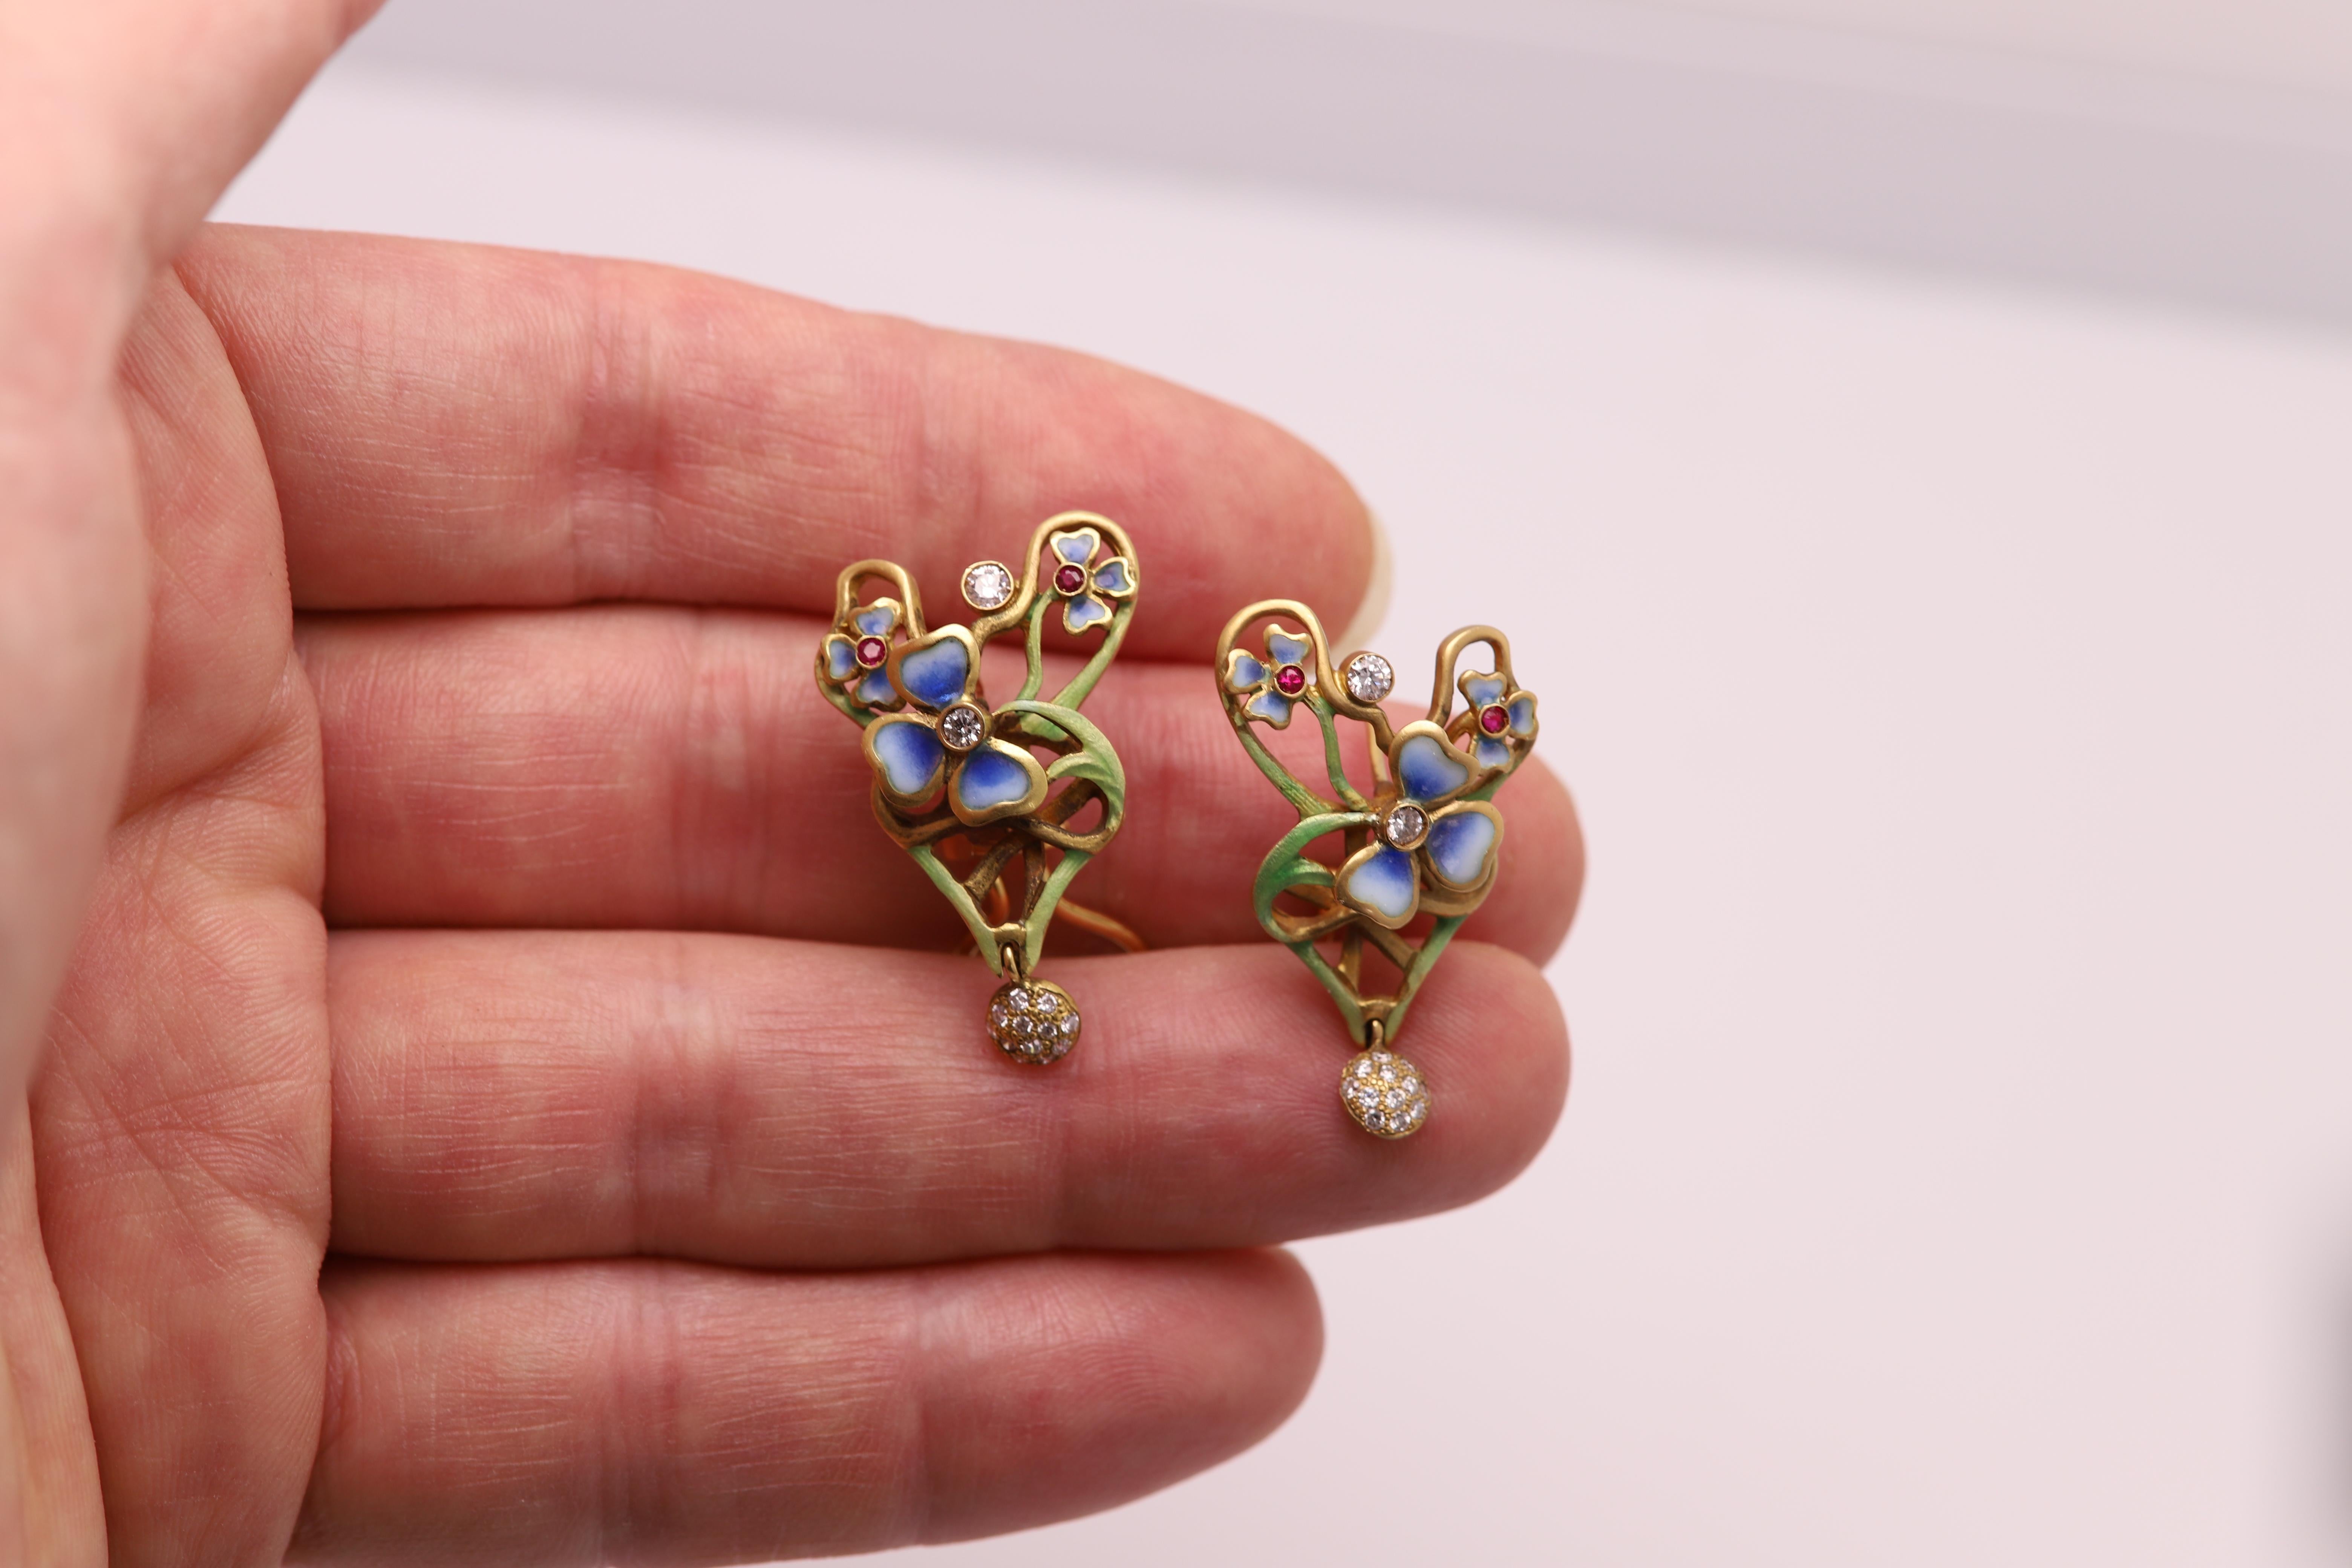 Vintage Hand made in Spain Enamel earrings - MAGNIFICENT LOOK
18k yellow Gold 
approx size 1.25'  inch (35 mm)
has two diamonds + a cluster of diamonds(12 diamonds) and two Ruby on each ear
Total Diamonds approx 0.50 carat
Total Weight 12